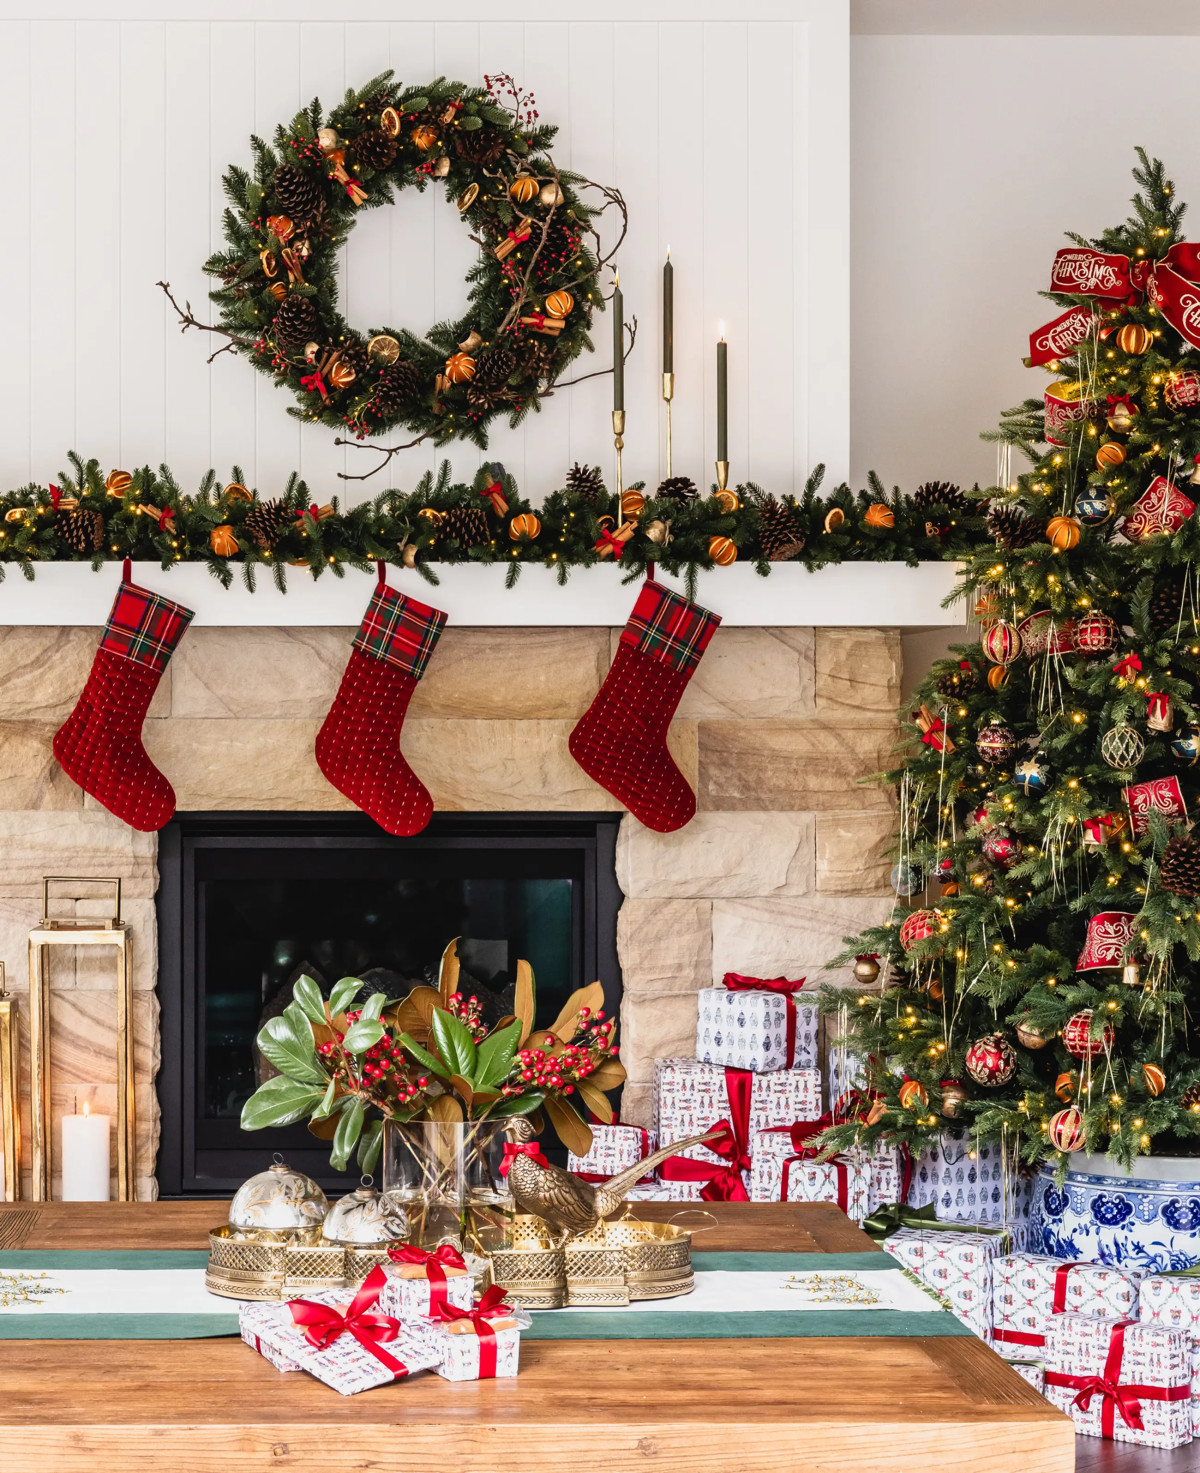 Bright Interior Design Tips To Freshen Up Out-Of-Date Festive Decorations